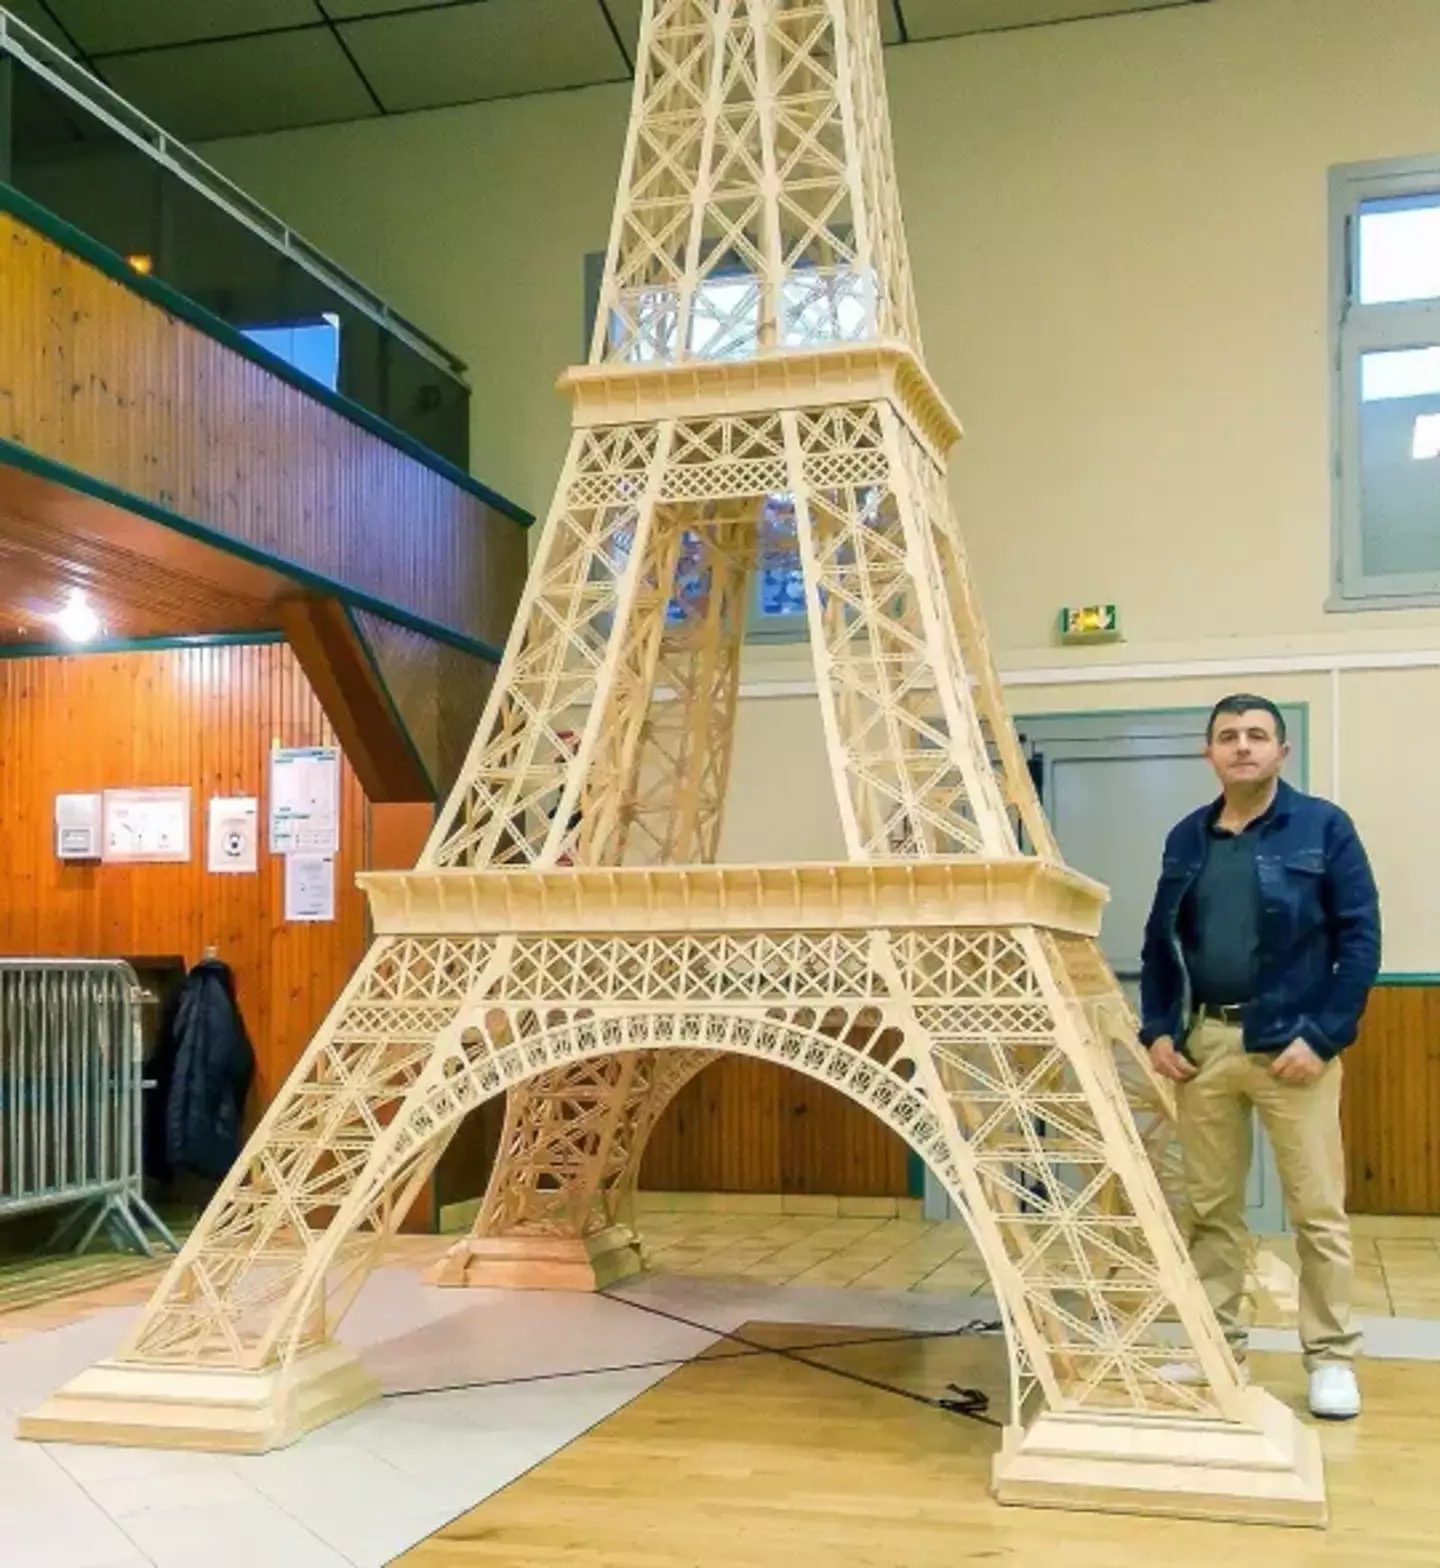 The Frenchman's matchstick model was rejected by the Guinness World Records.